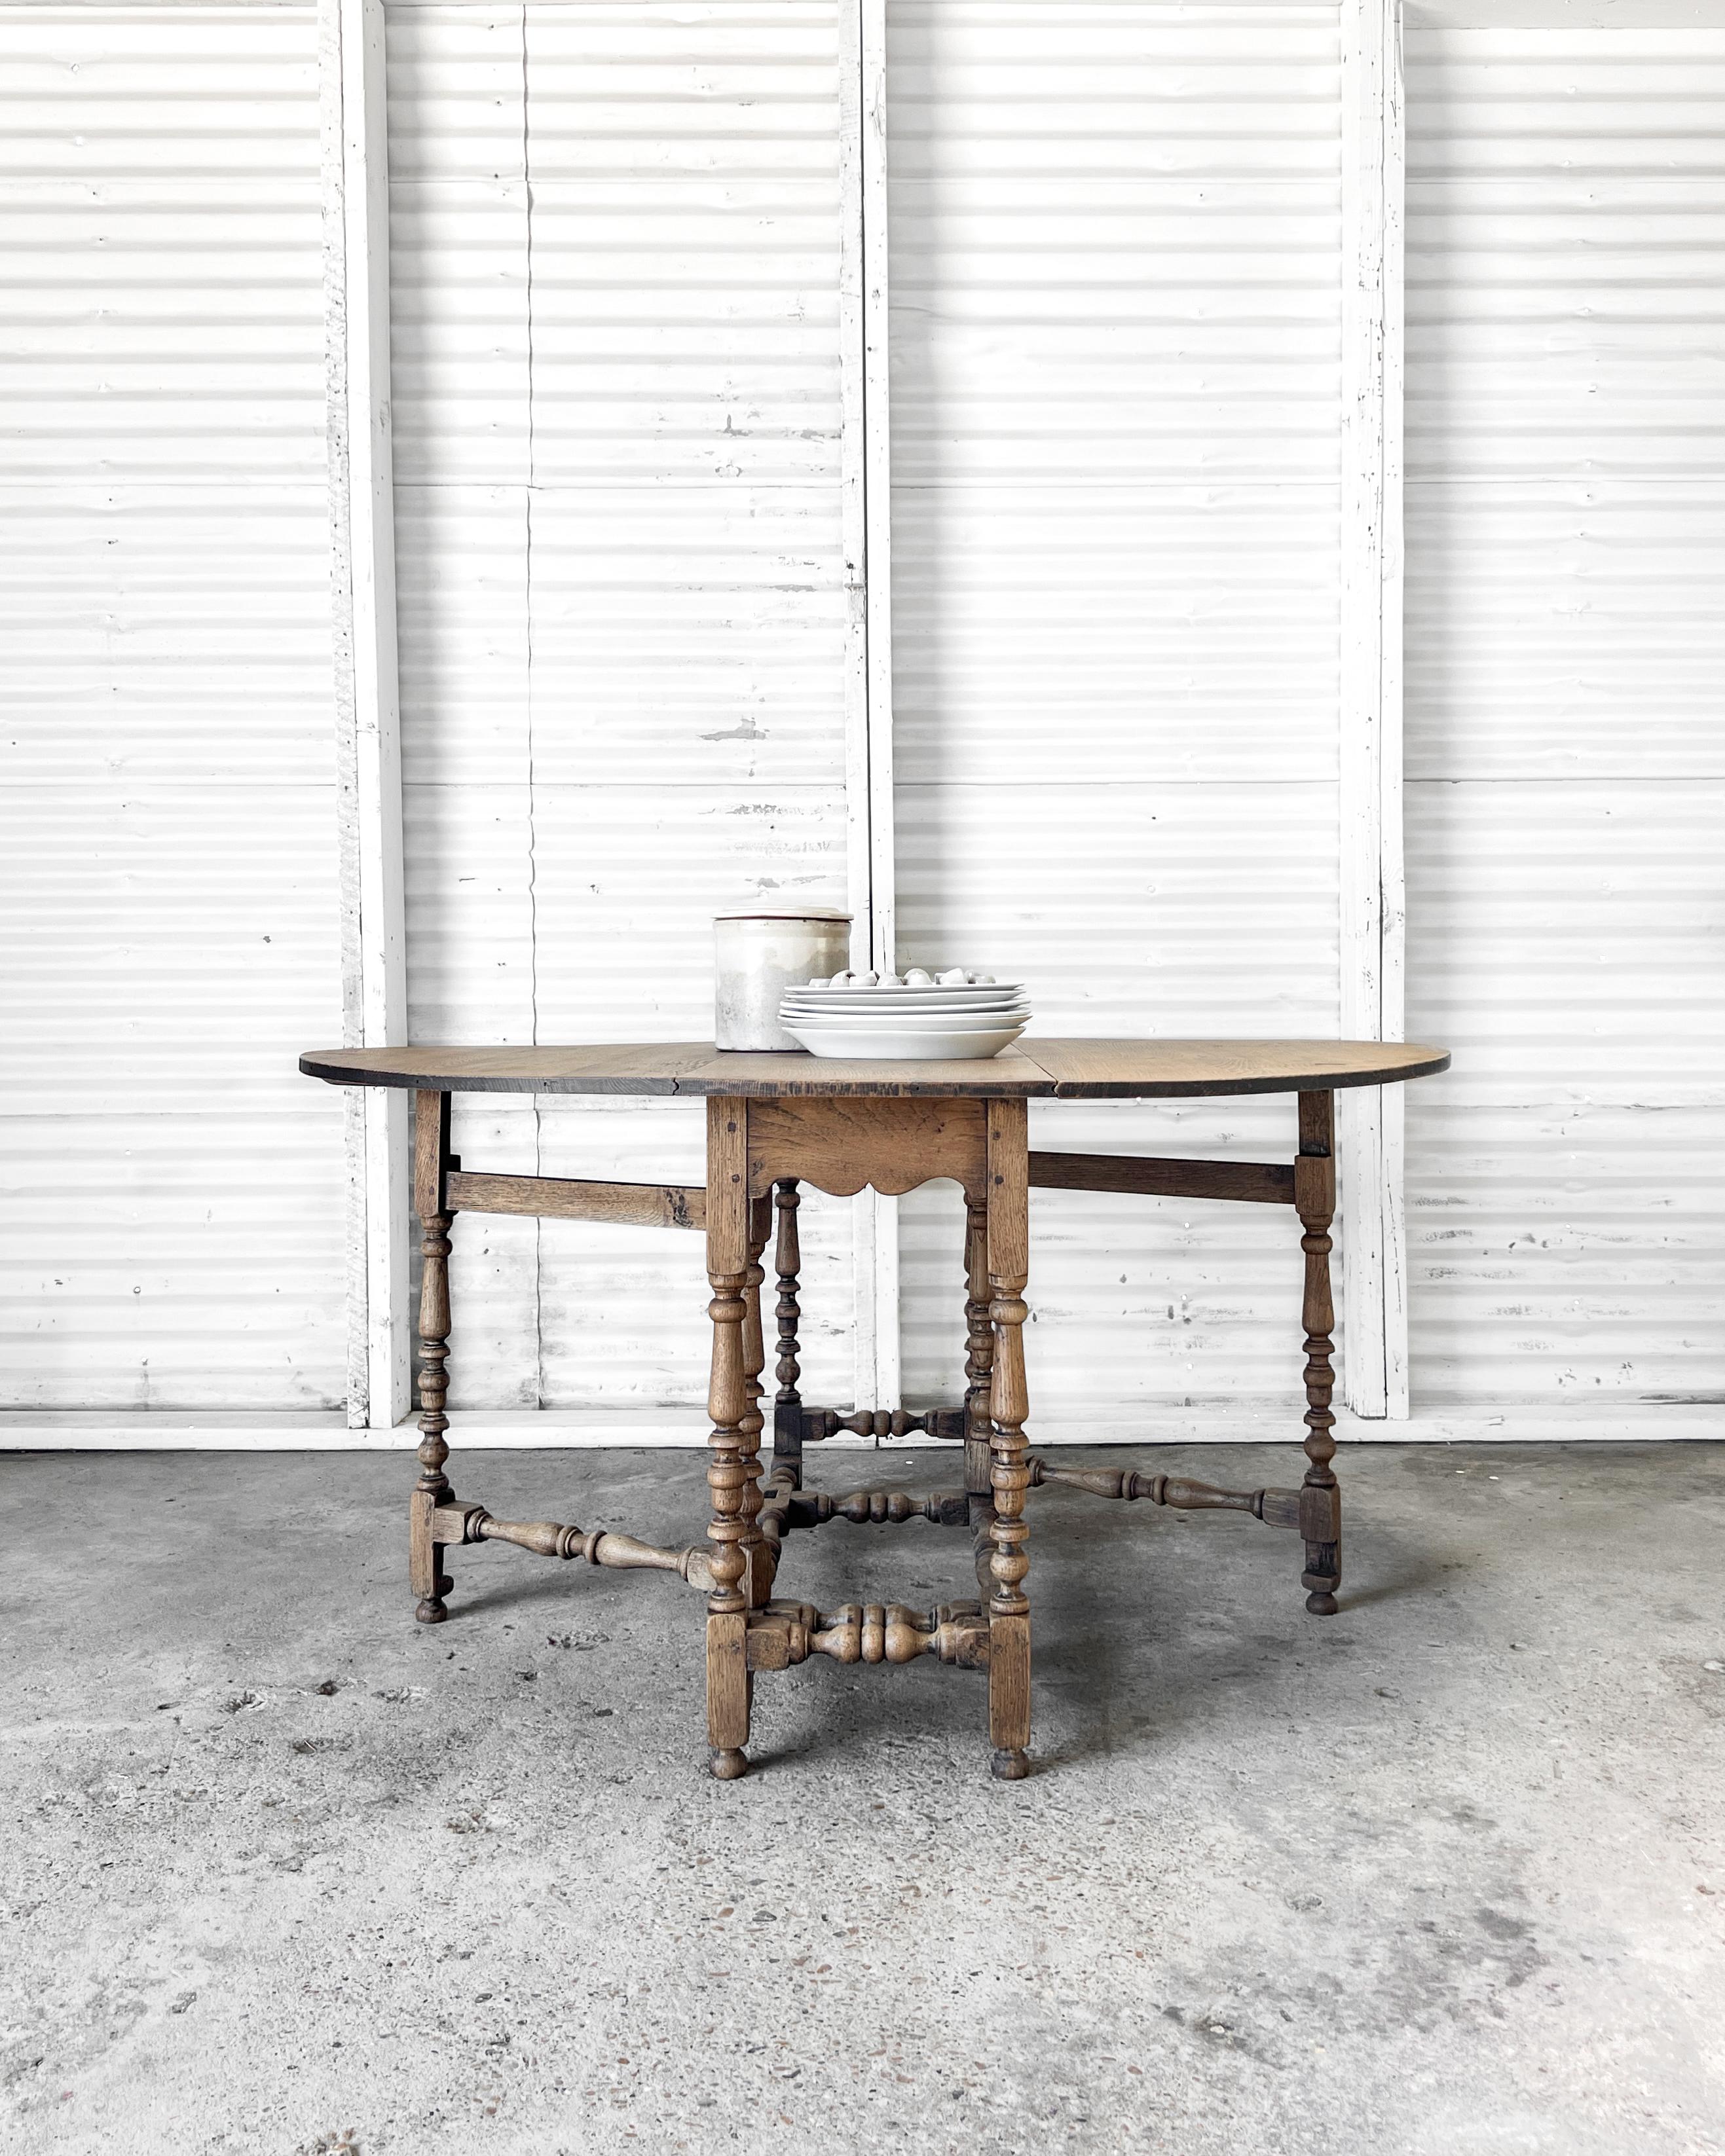 Perfect for gathering around during dinner parties, lazy weekend breakfasts, or simply working on weeknight homework assignments, this lovely antique drop-leaf, gate leg table is not only beautiful but is a charming multitasking accent table that